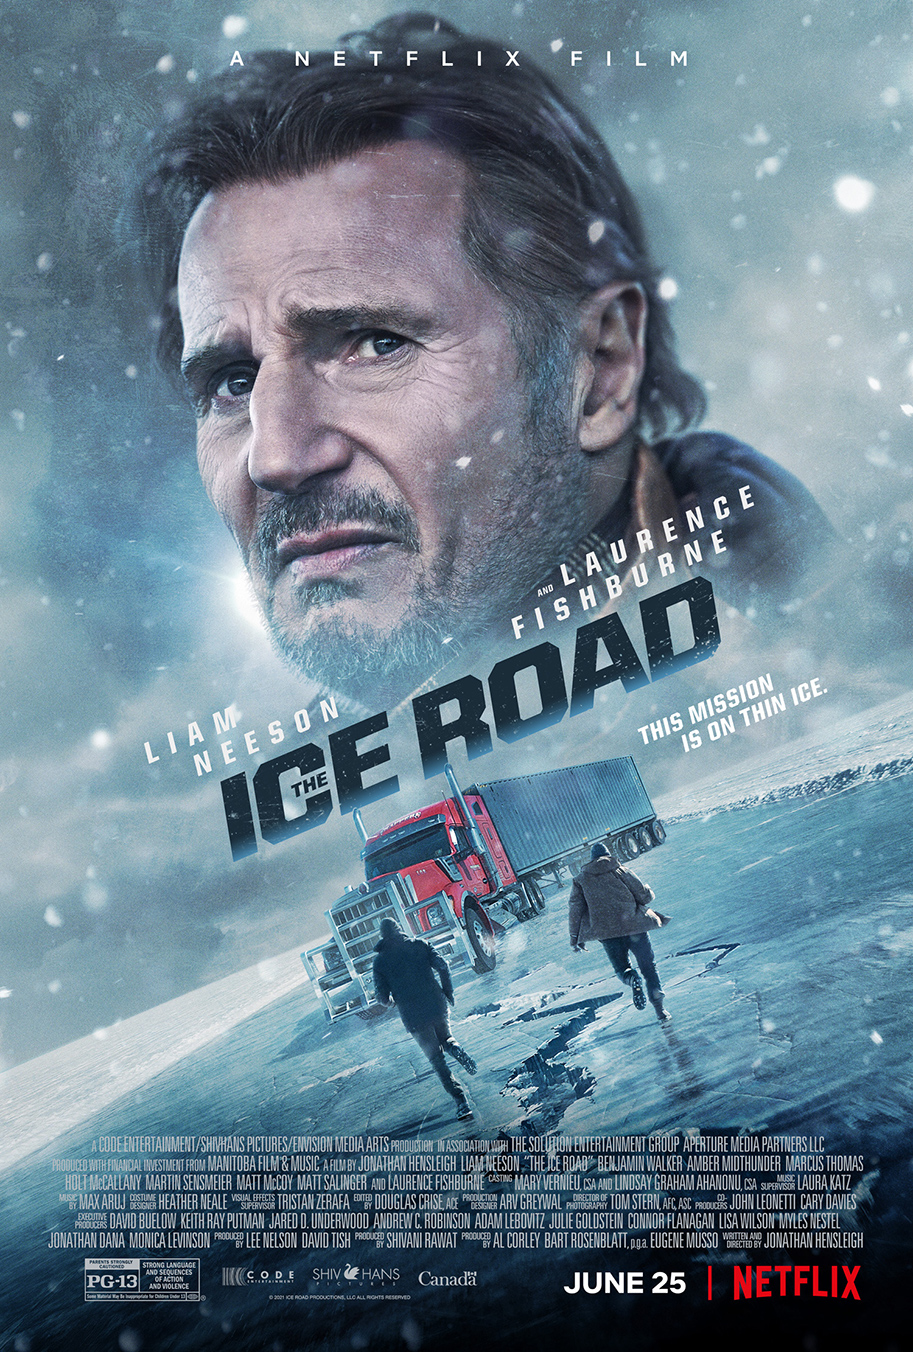 The Ice Road, Netflix, poster, Liam Neeson